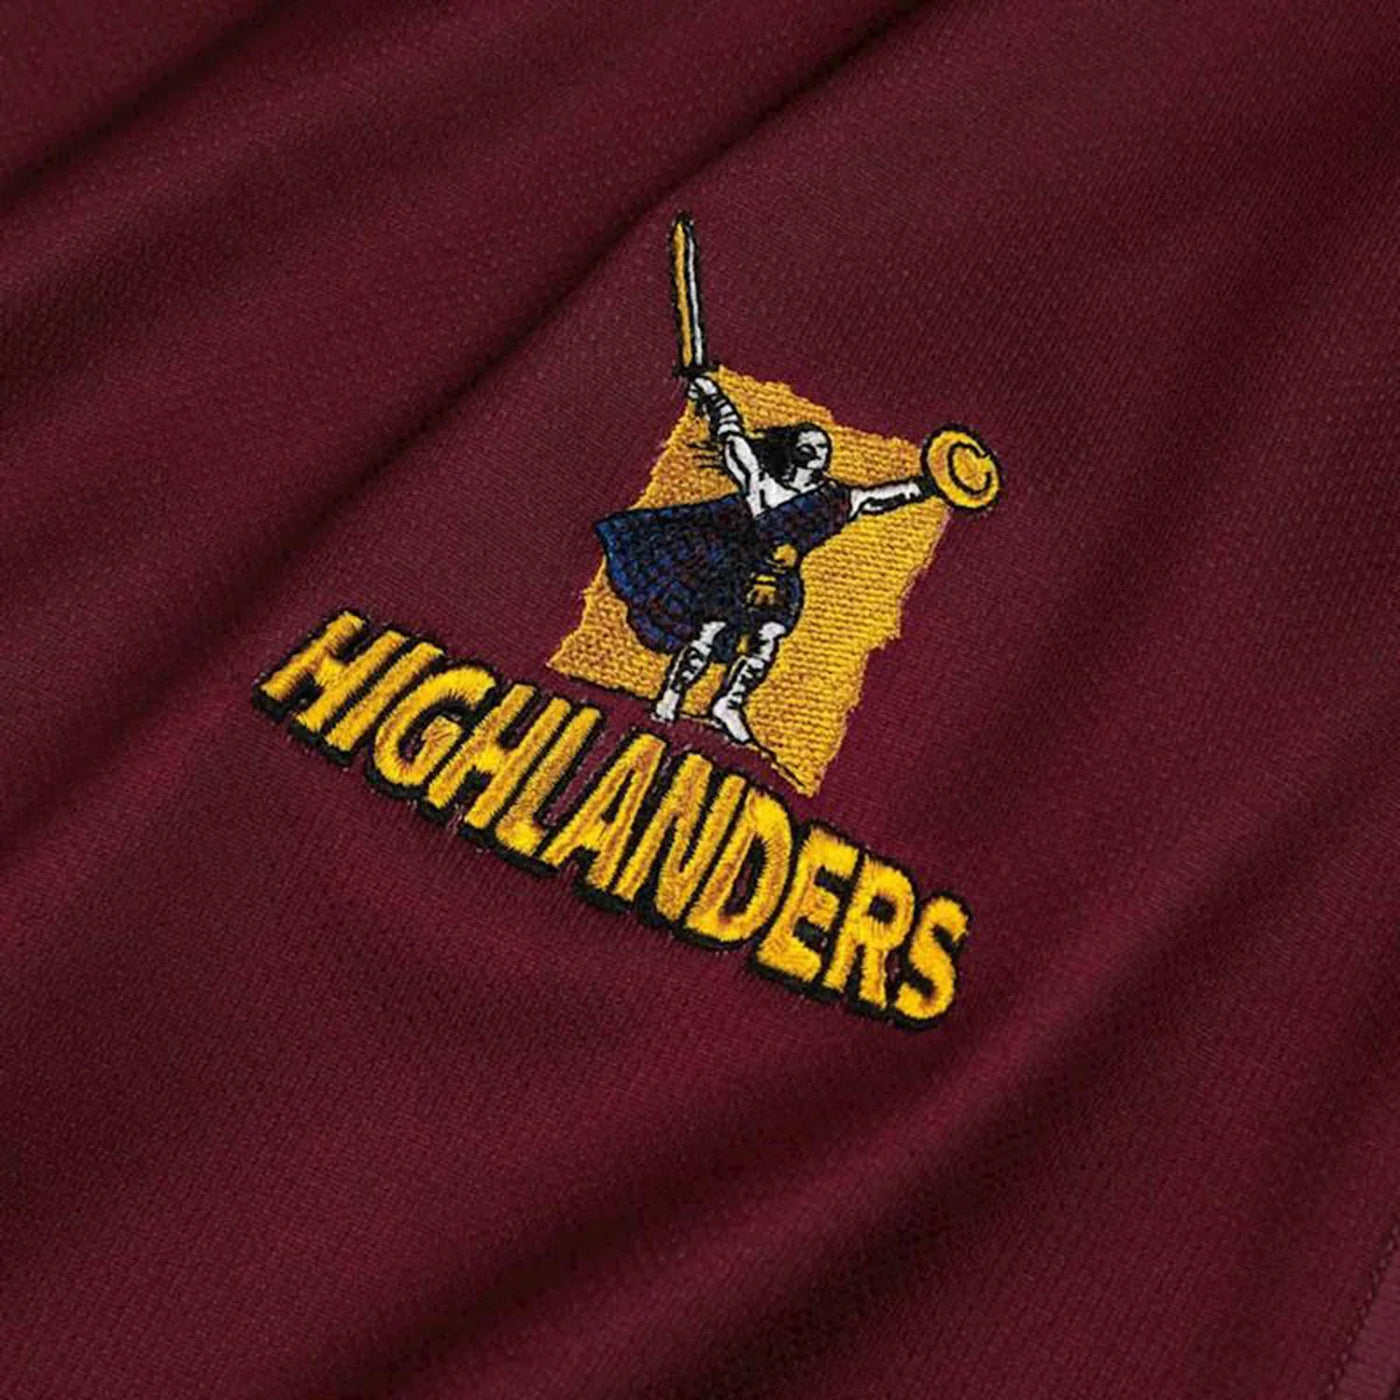 Highlanders Super Rugby Men's Away Shirt 2024 (available soon)